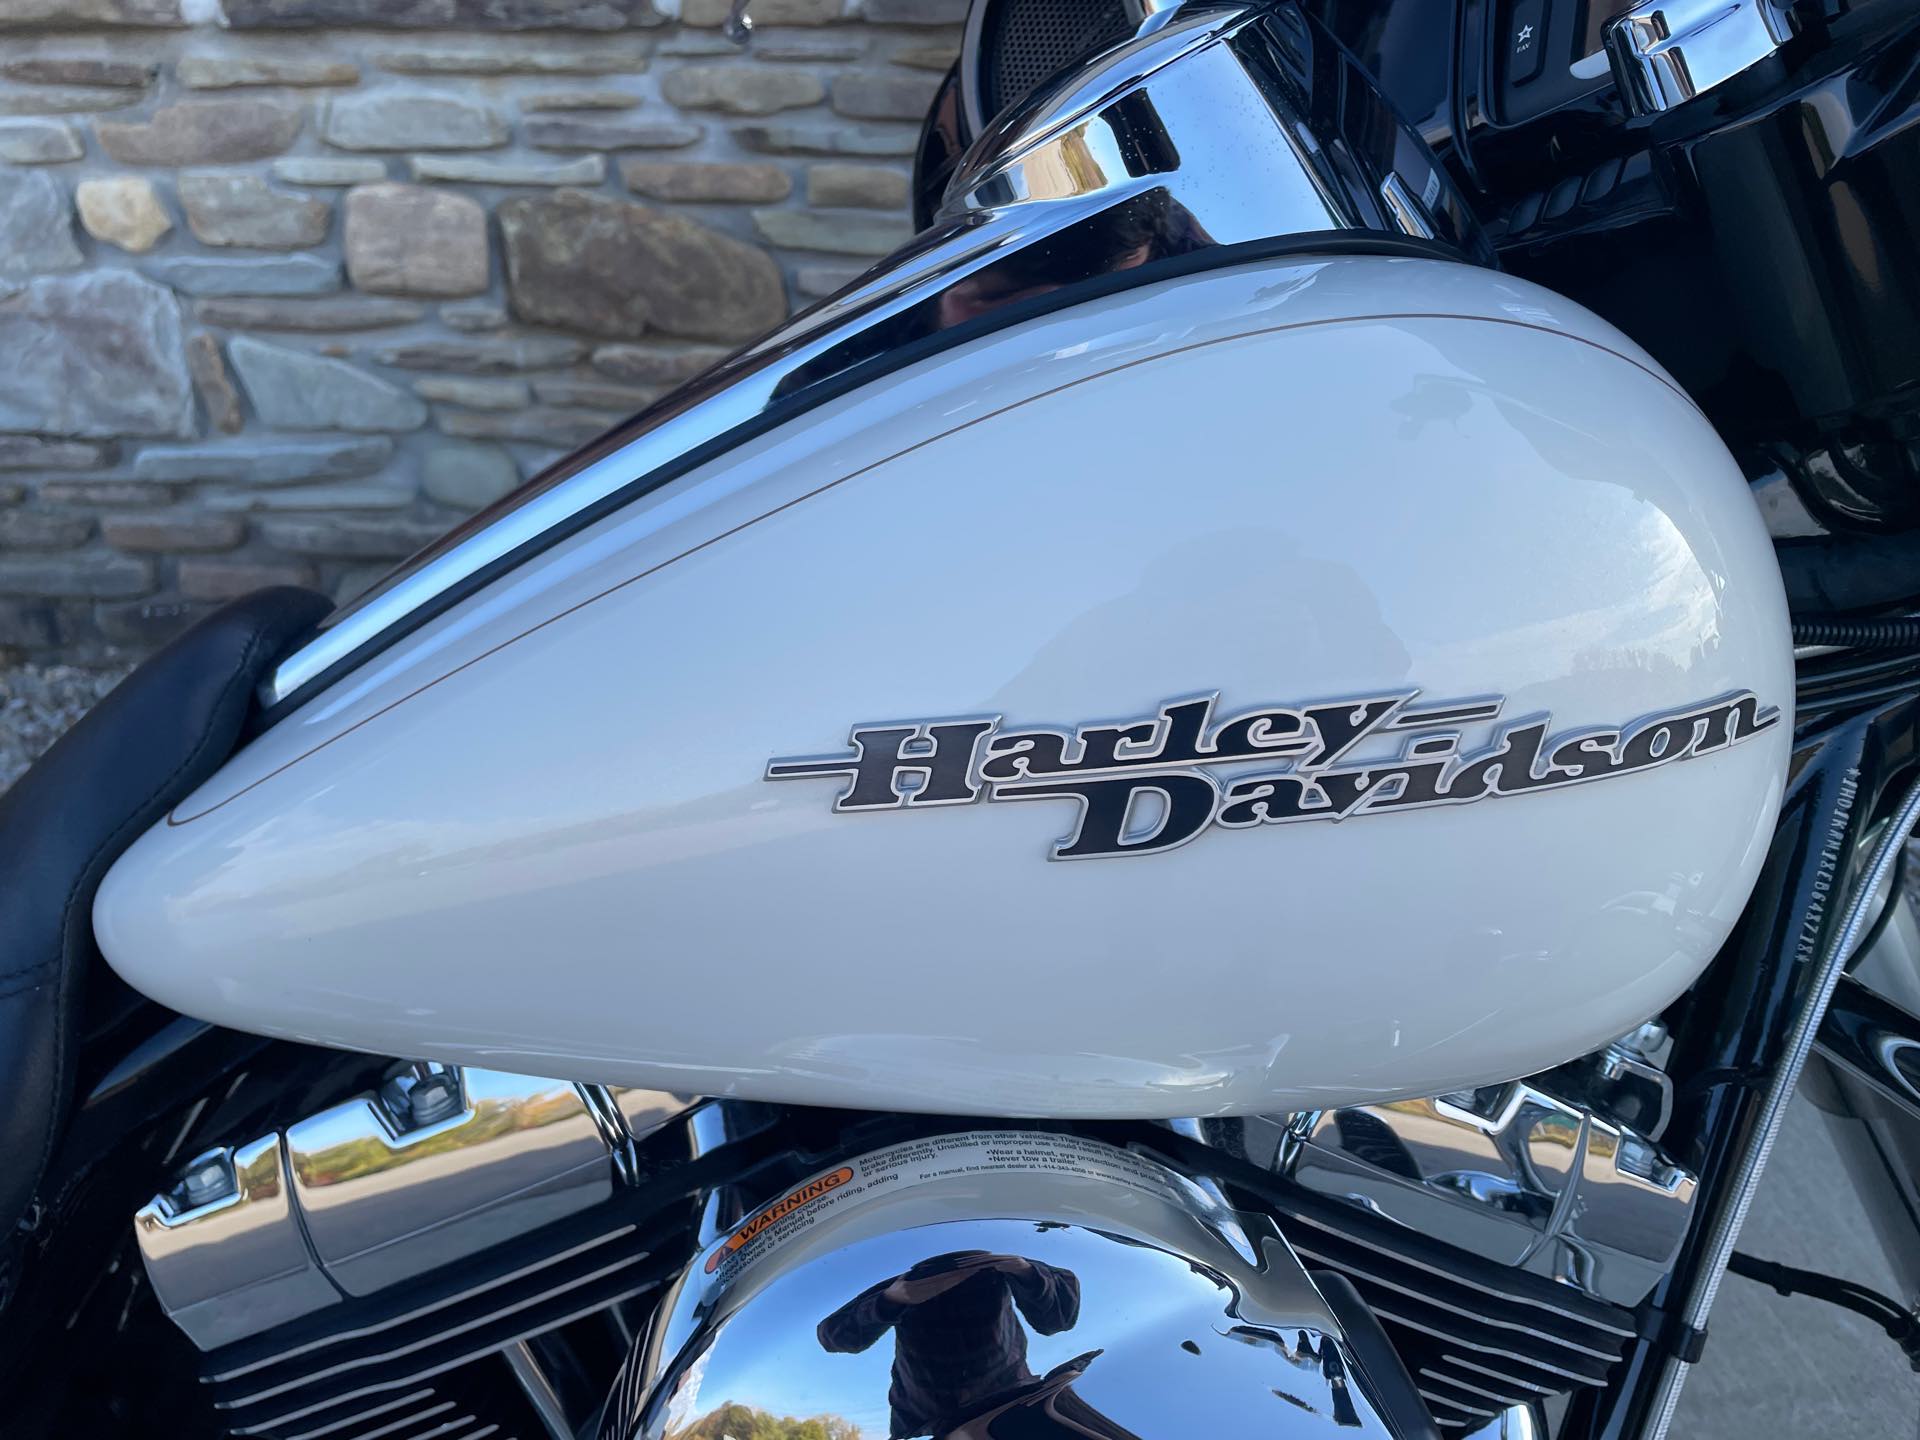 2014 Harley-Davidson Street Glide Special at Arkport Cycles